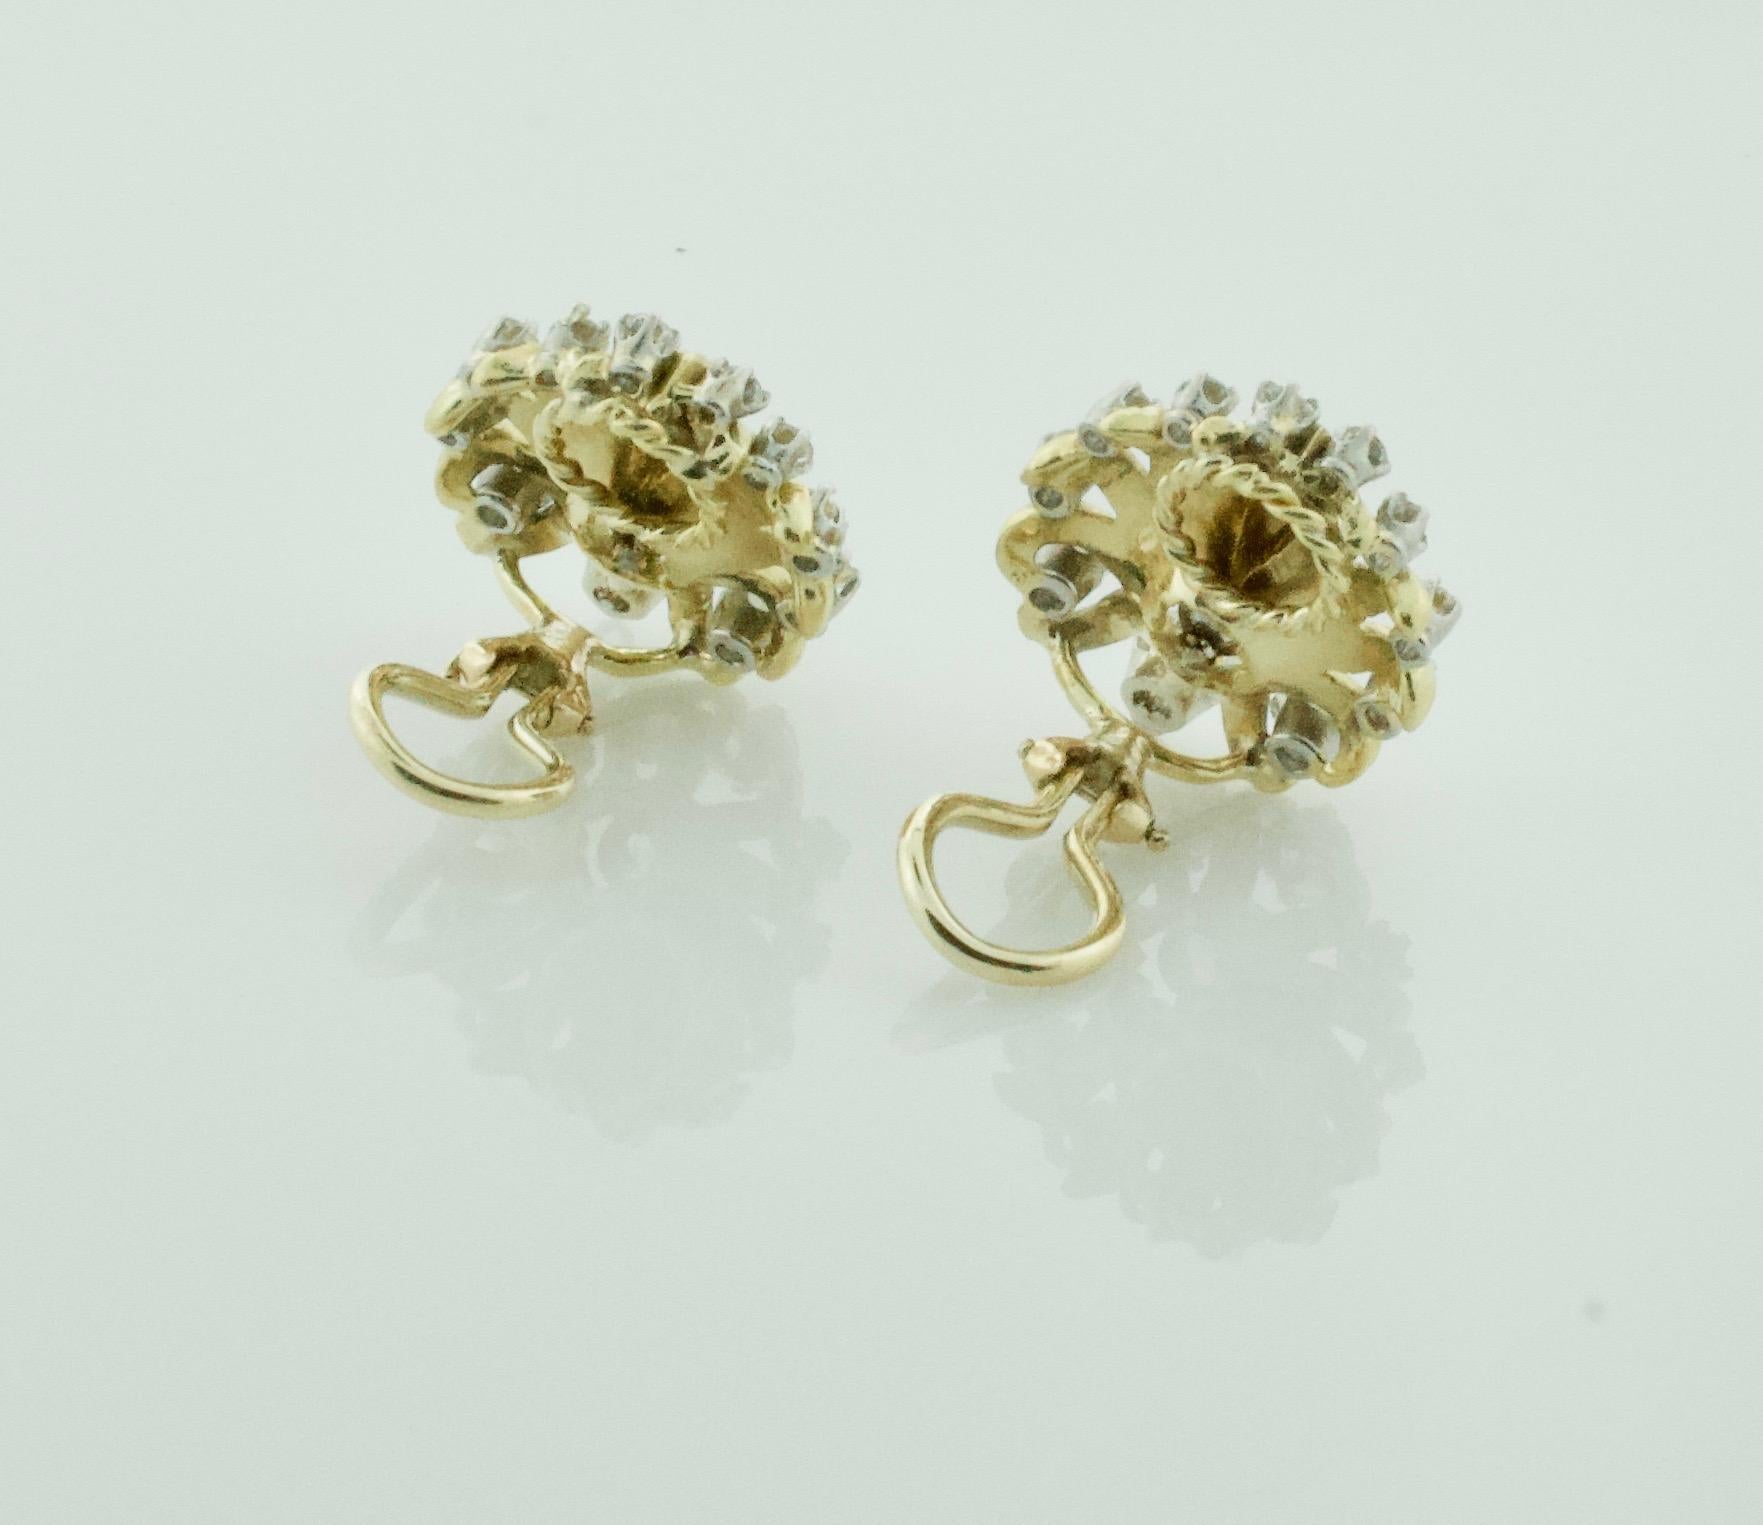 indulge in the vintage elegance of these Delightful 18k yellow and white gold earrings from the 1950s. Featuring 8 round brilliant cut diamonds weighing approximately 1.30 carats, and 16 round brilliant cut diamonds weighing approximately .50